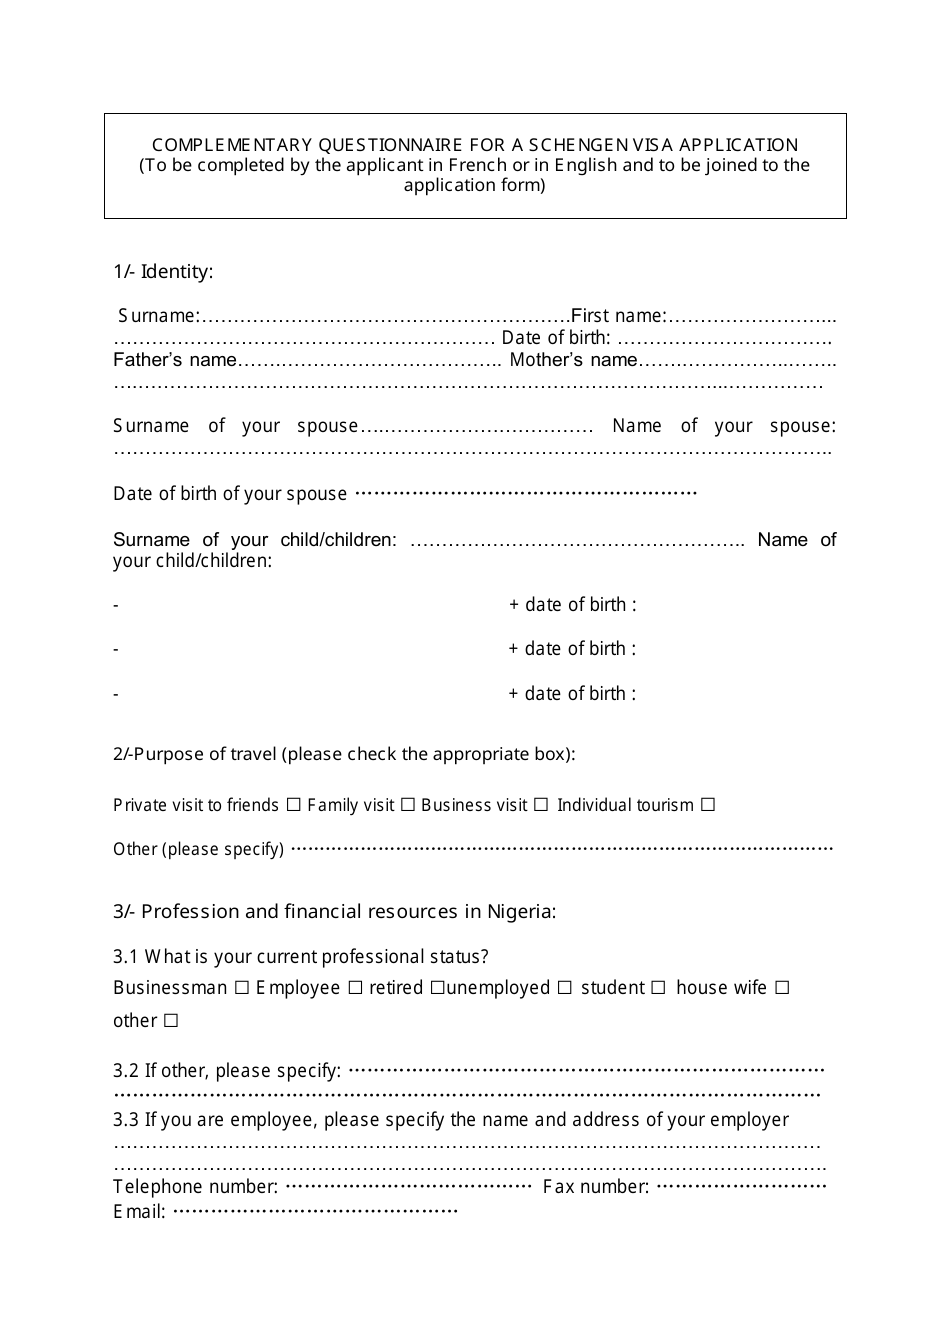 Complementary Questionnaire for a Schengen Visa Application - the Consulate General of France in Lagos - Lagos, Nigeria, Page 1